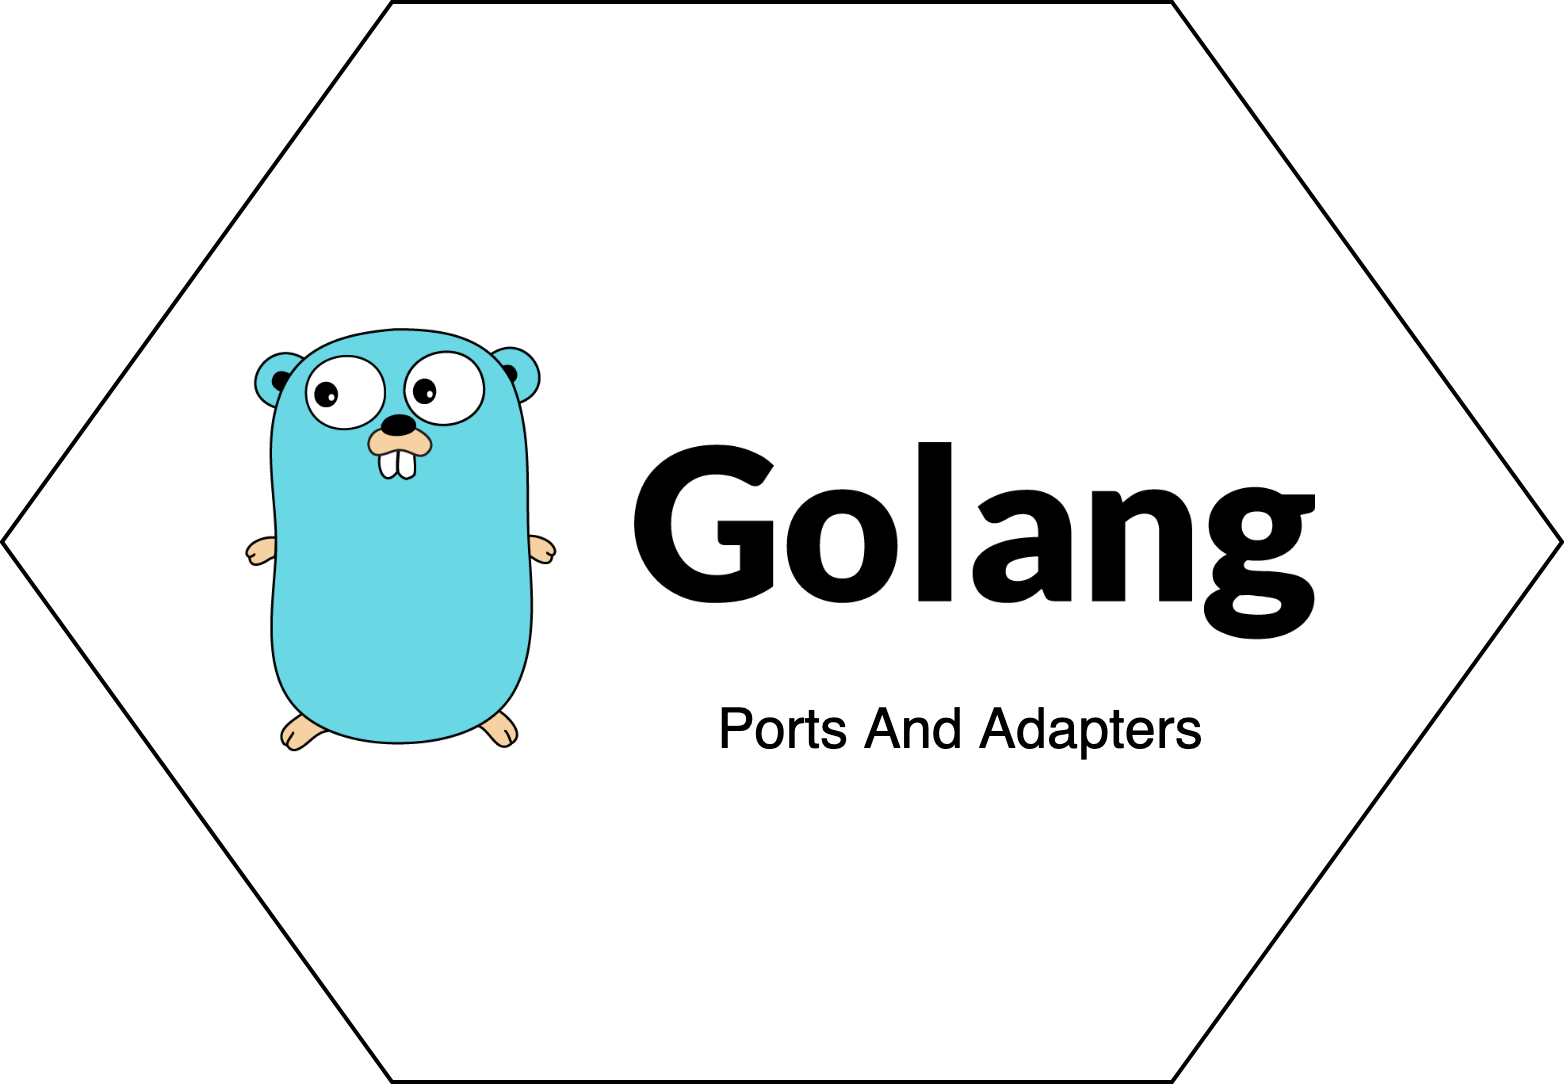 Implementing Ports and Adapters